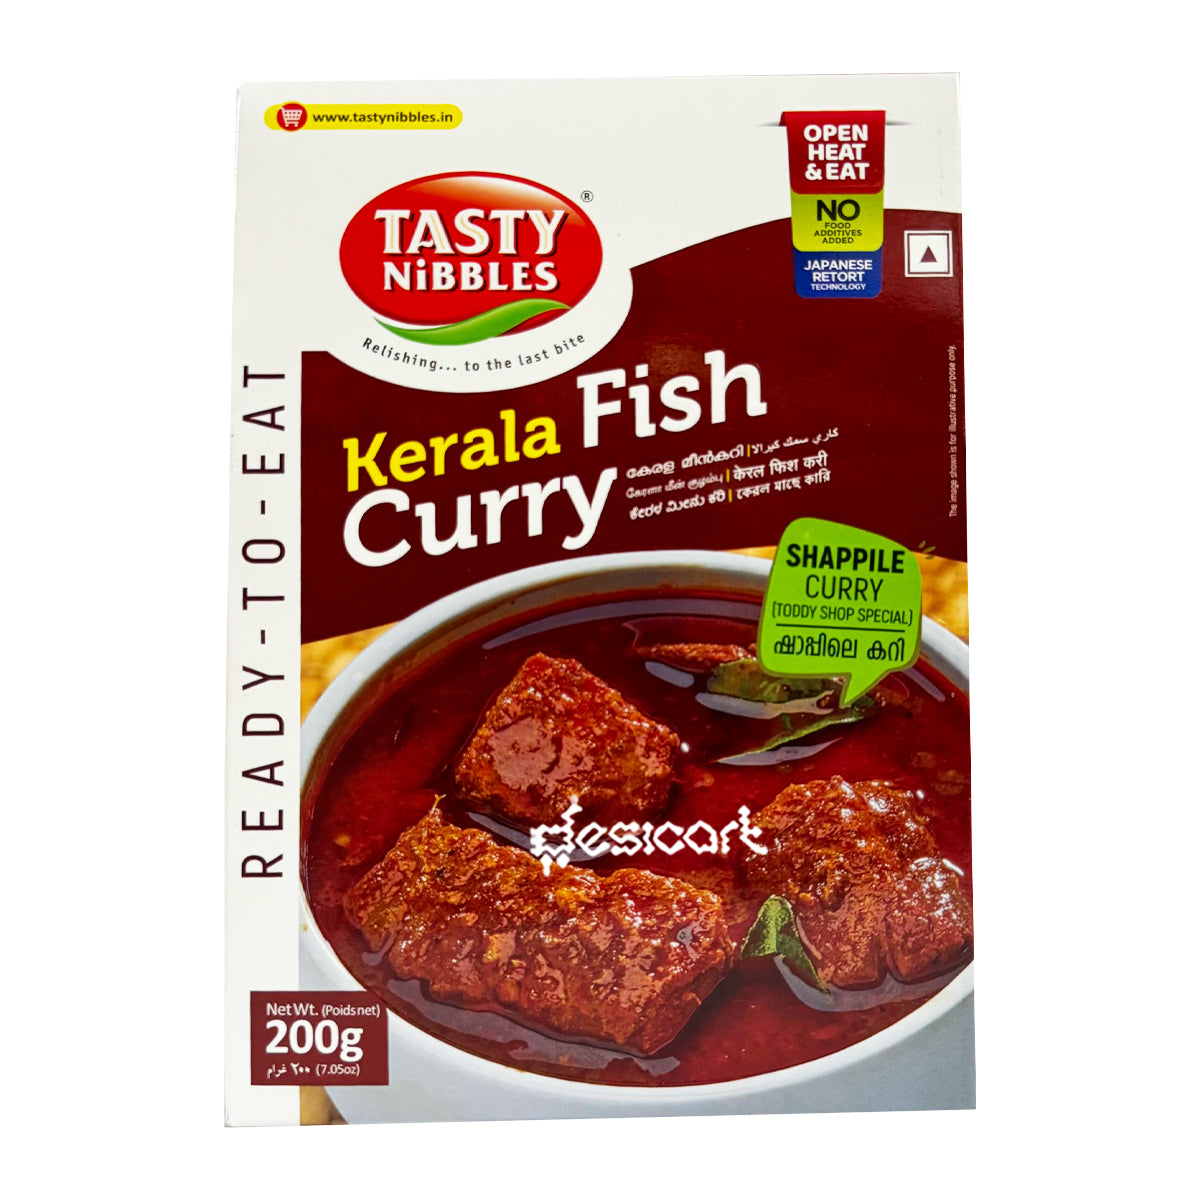 Tasty Nibbles Kerala fish Curry Shappile 200g